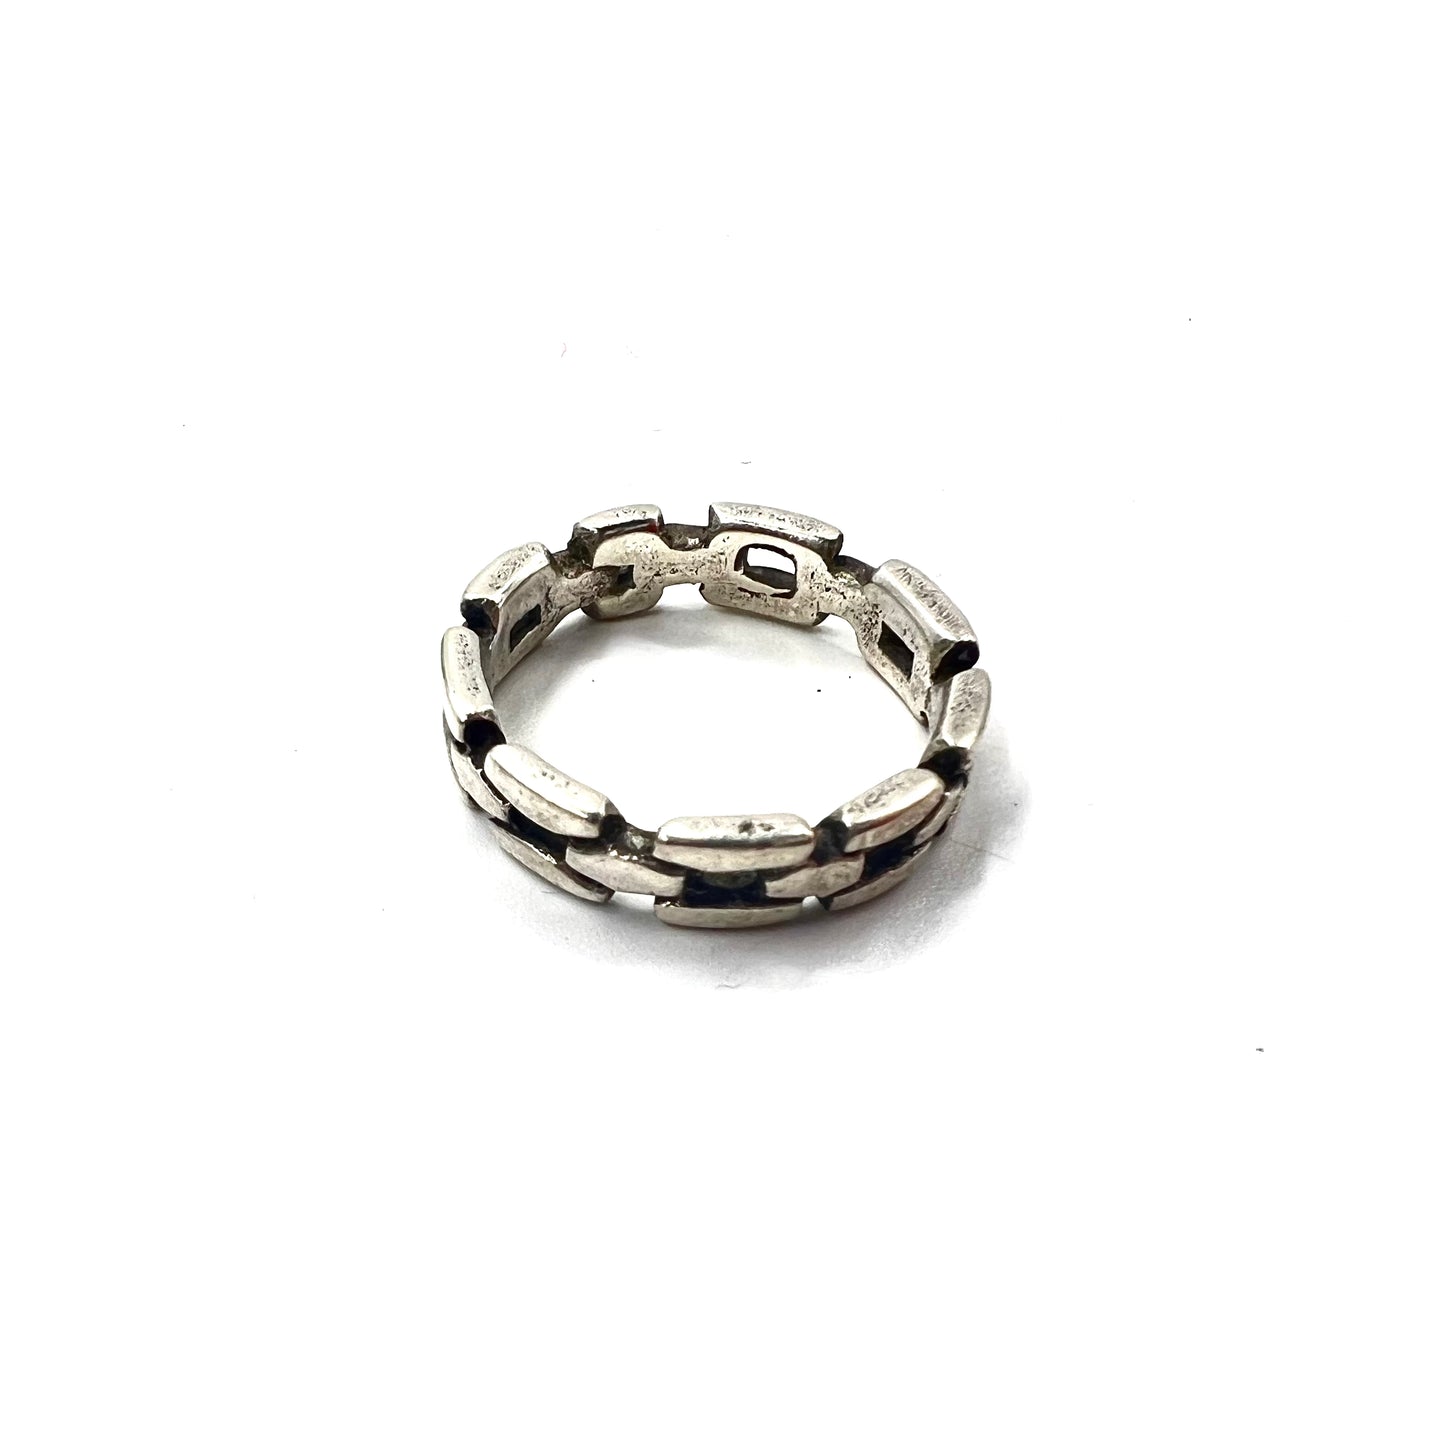 VINTAGE SILVER RING チェーンモチーフ シルバーリング 指輪 13号 SILVER 925